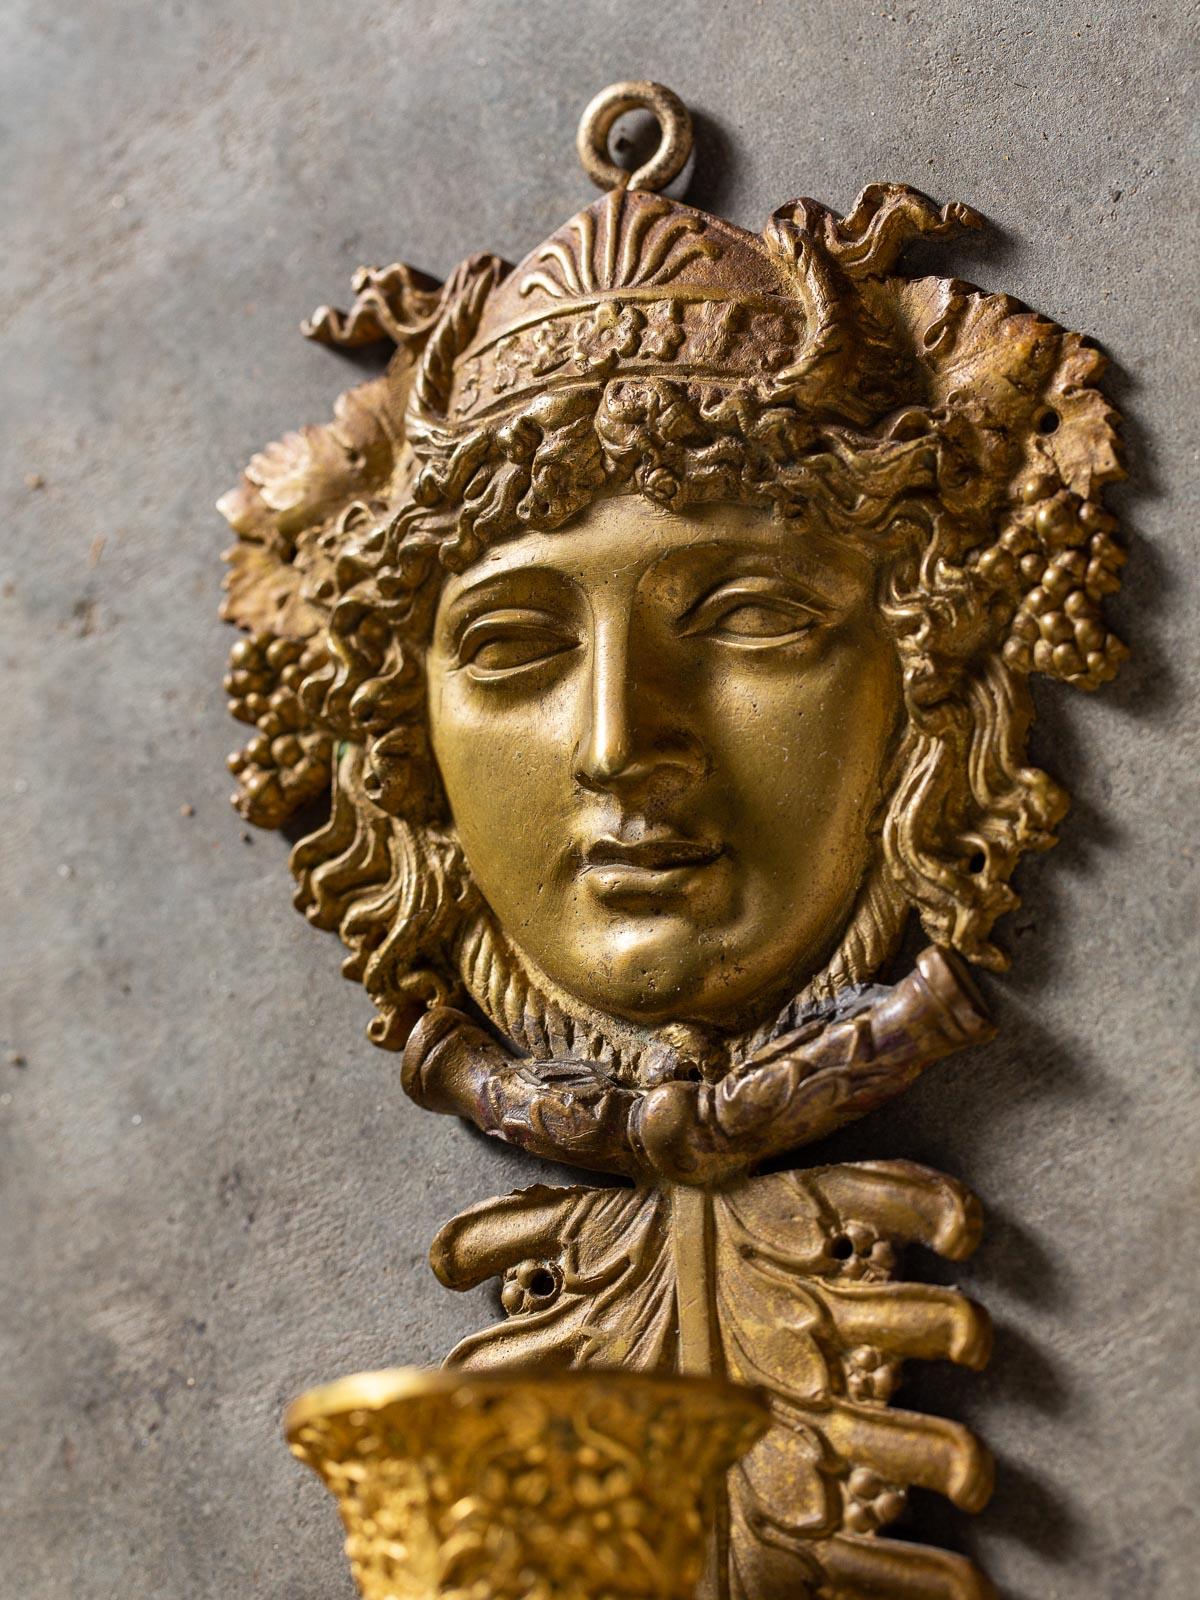 A pair of neoclassical antique French gilt bronze sconces Napoleon III period circa 1870. This pair of three arm French sconces feature a bold portrait head of Bacchus Dionysus (look at the entwined grape clusters and grape leaves entwined in the